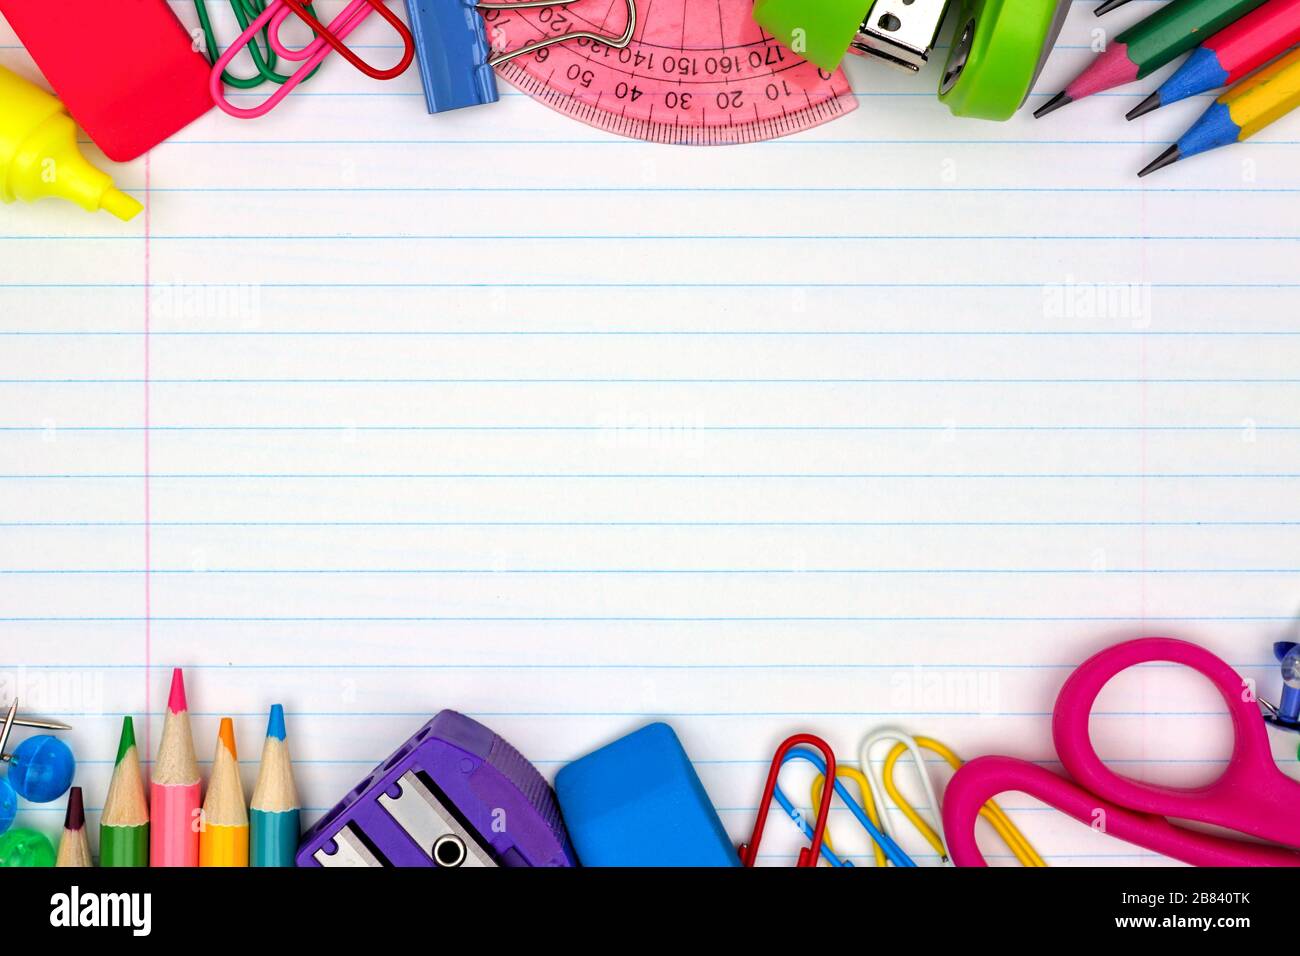 Colorful school supplies double border over a lined paper background Stock Photo